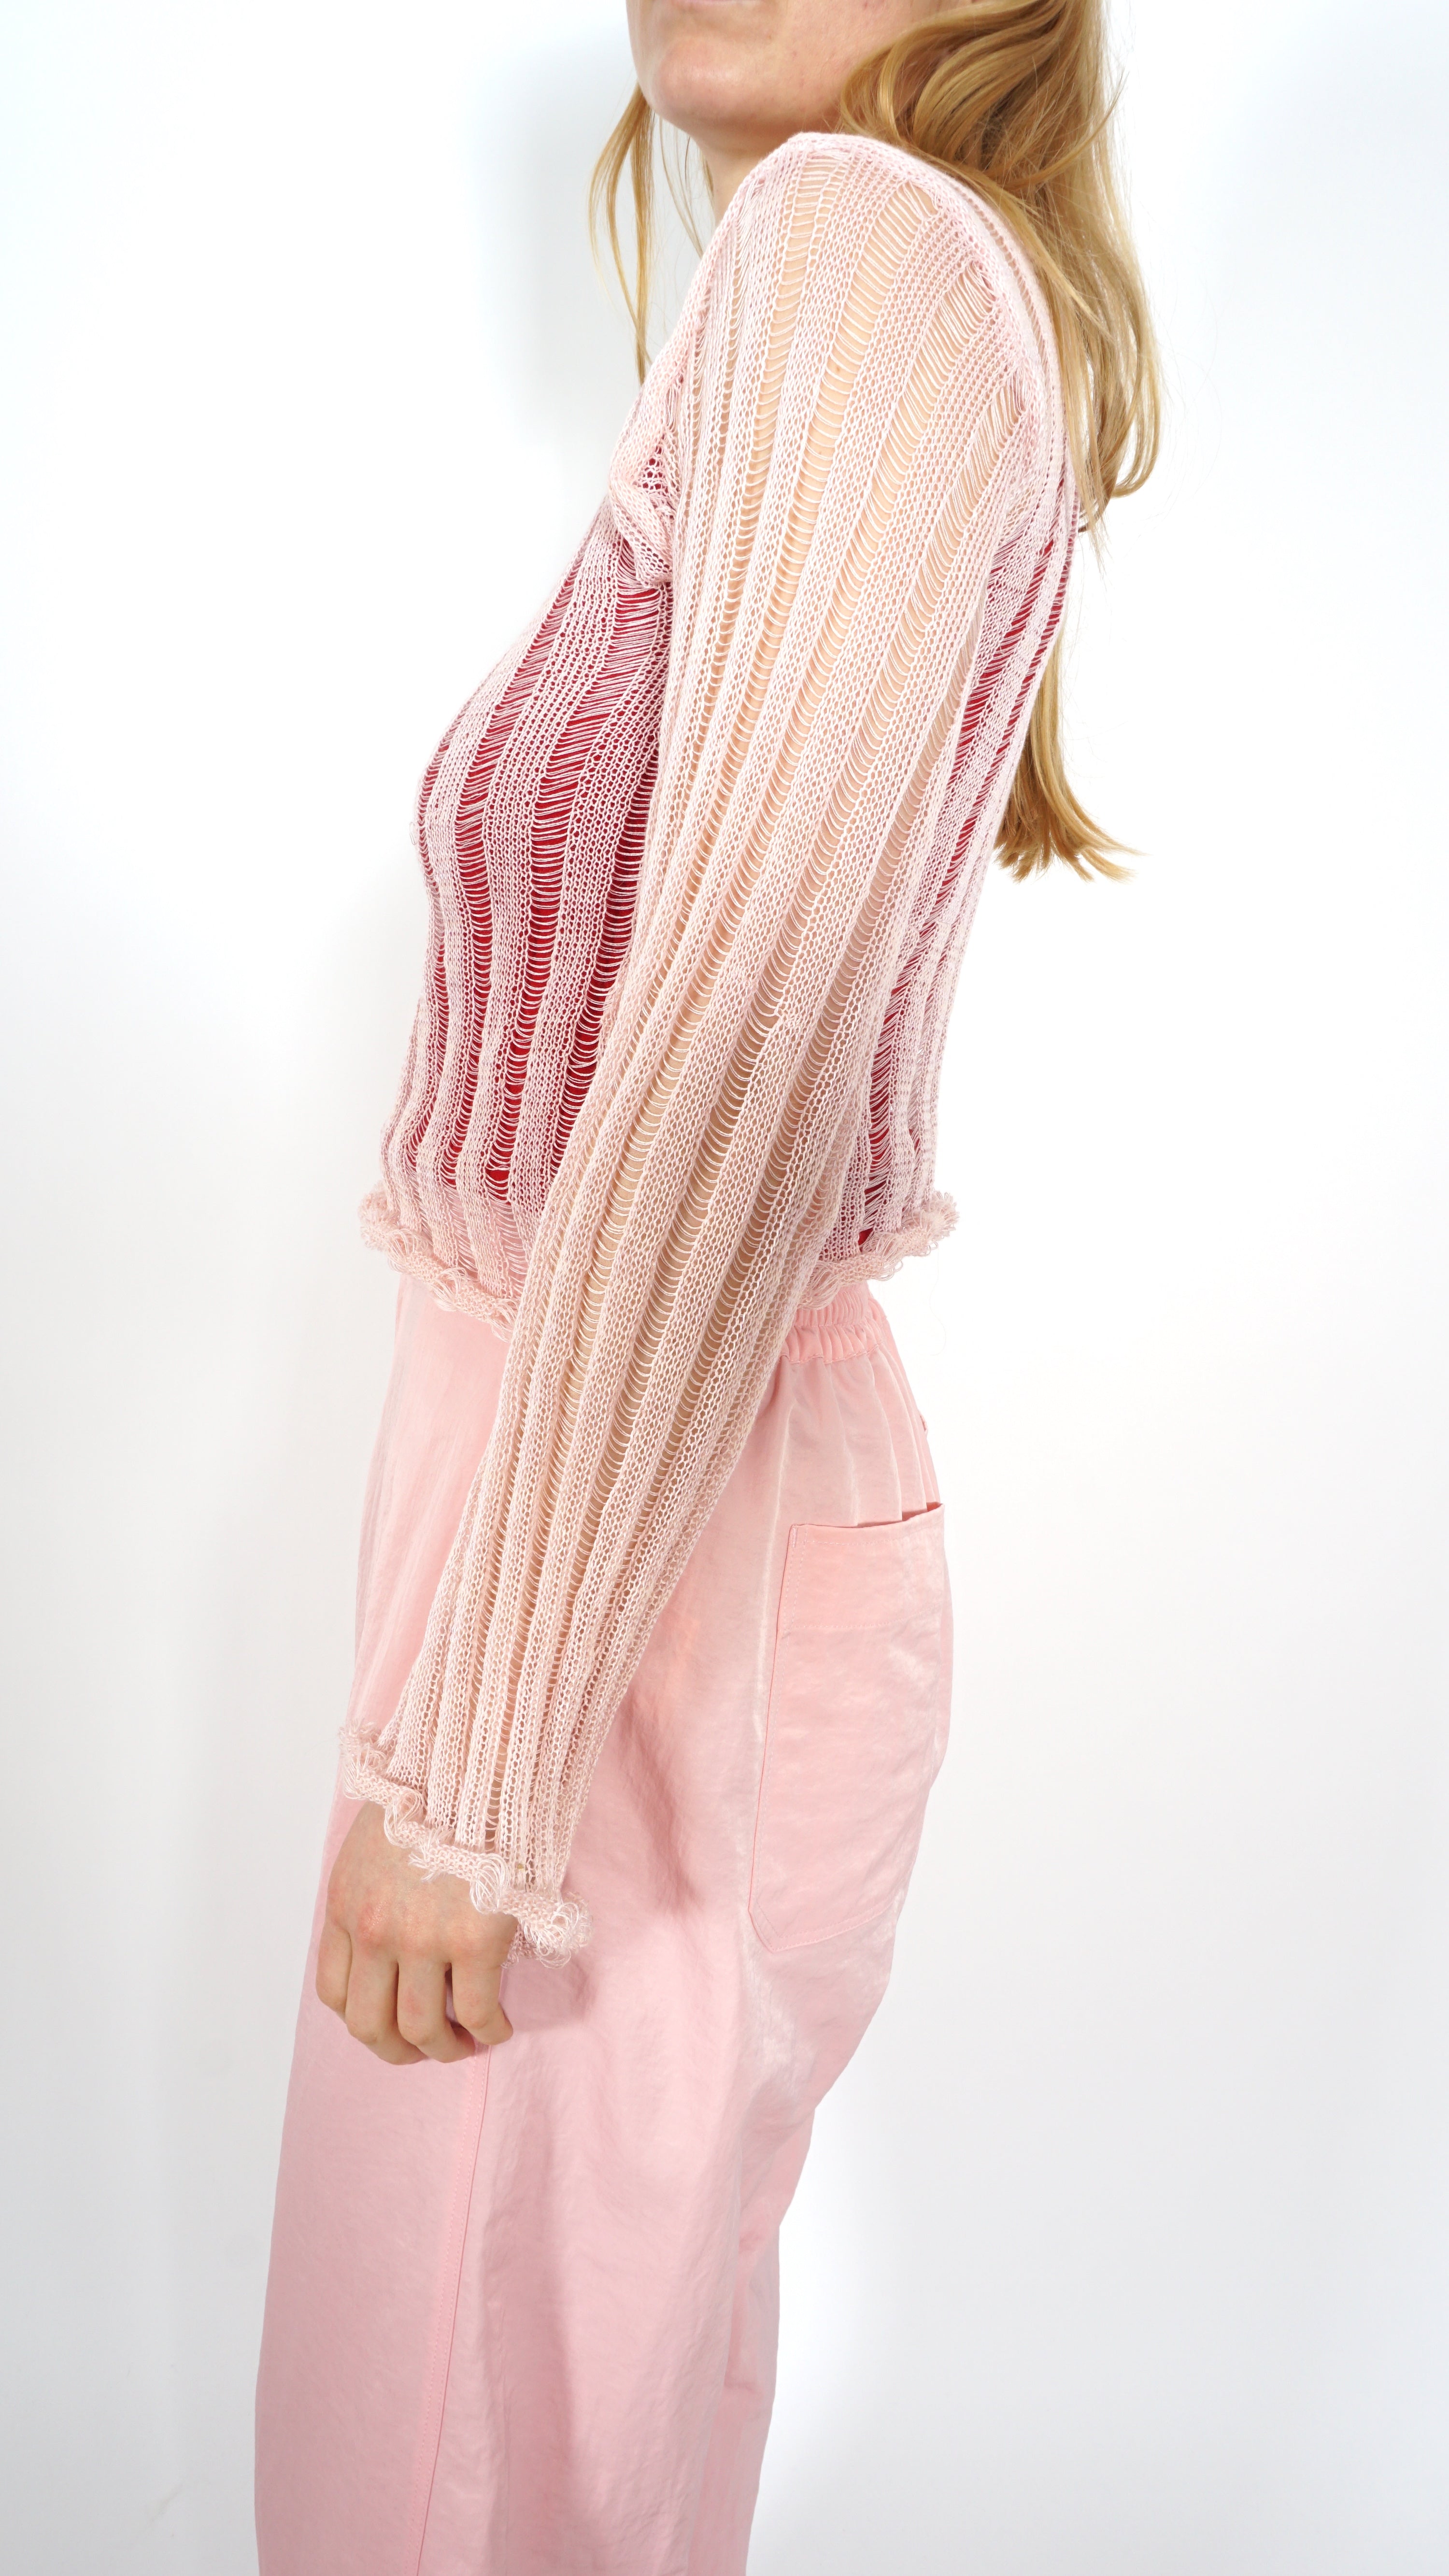 Long sleeve knit by Soher